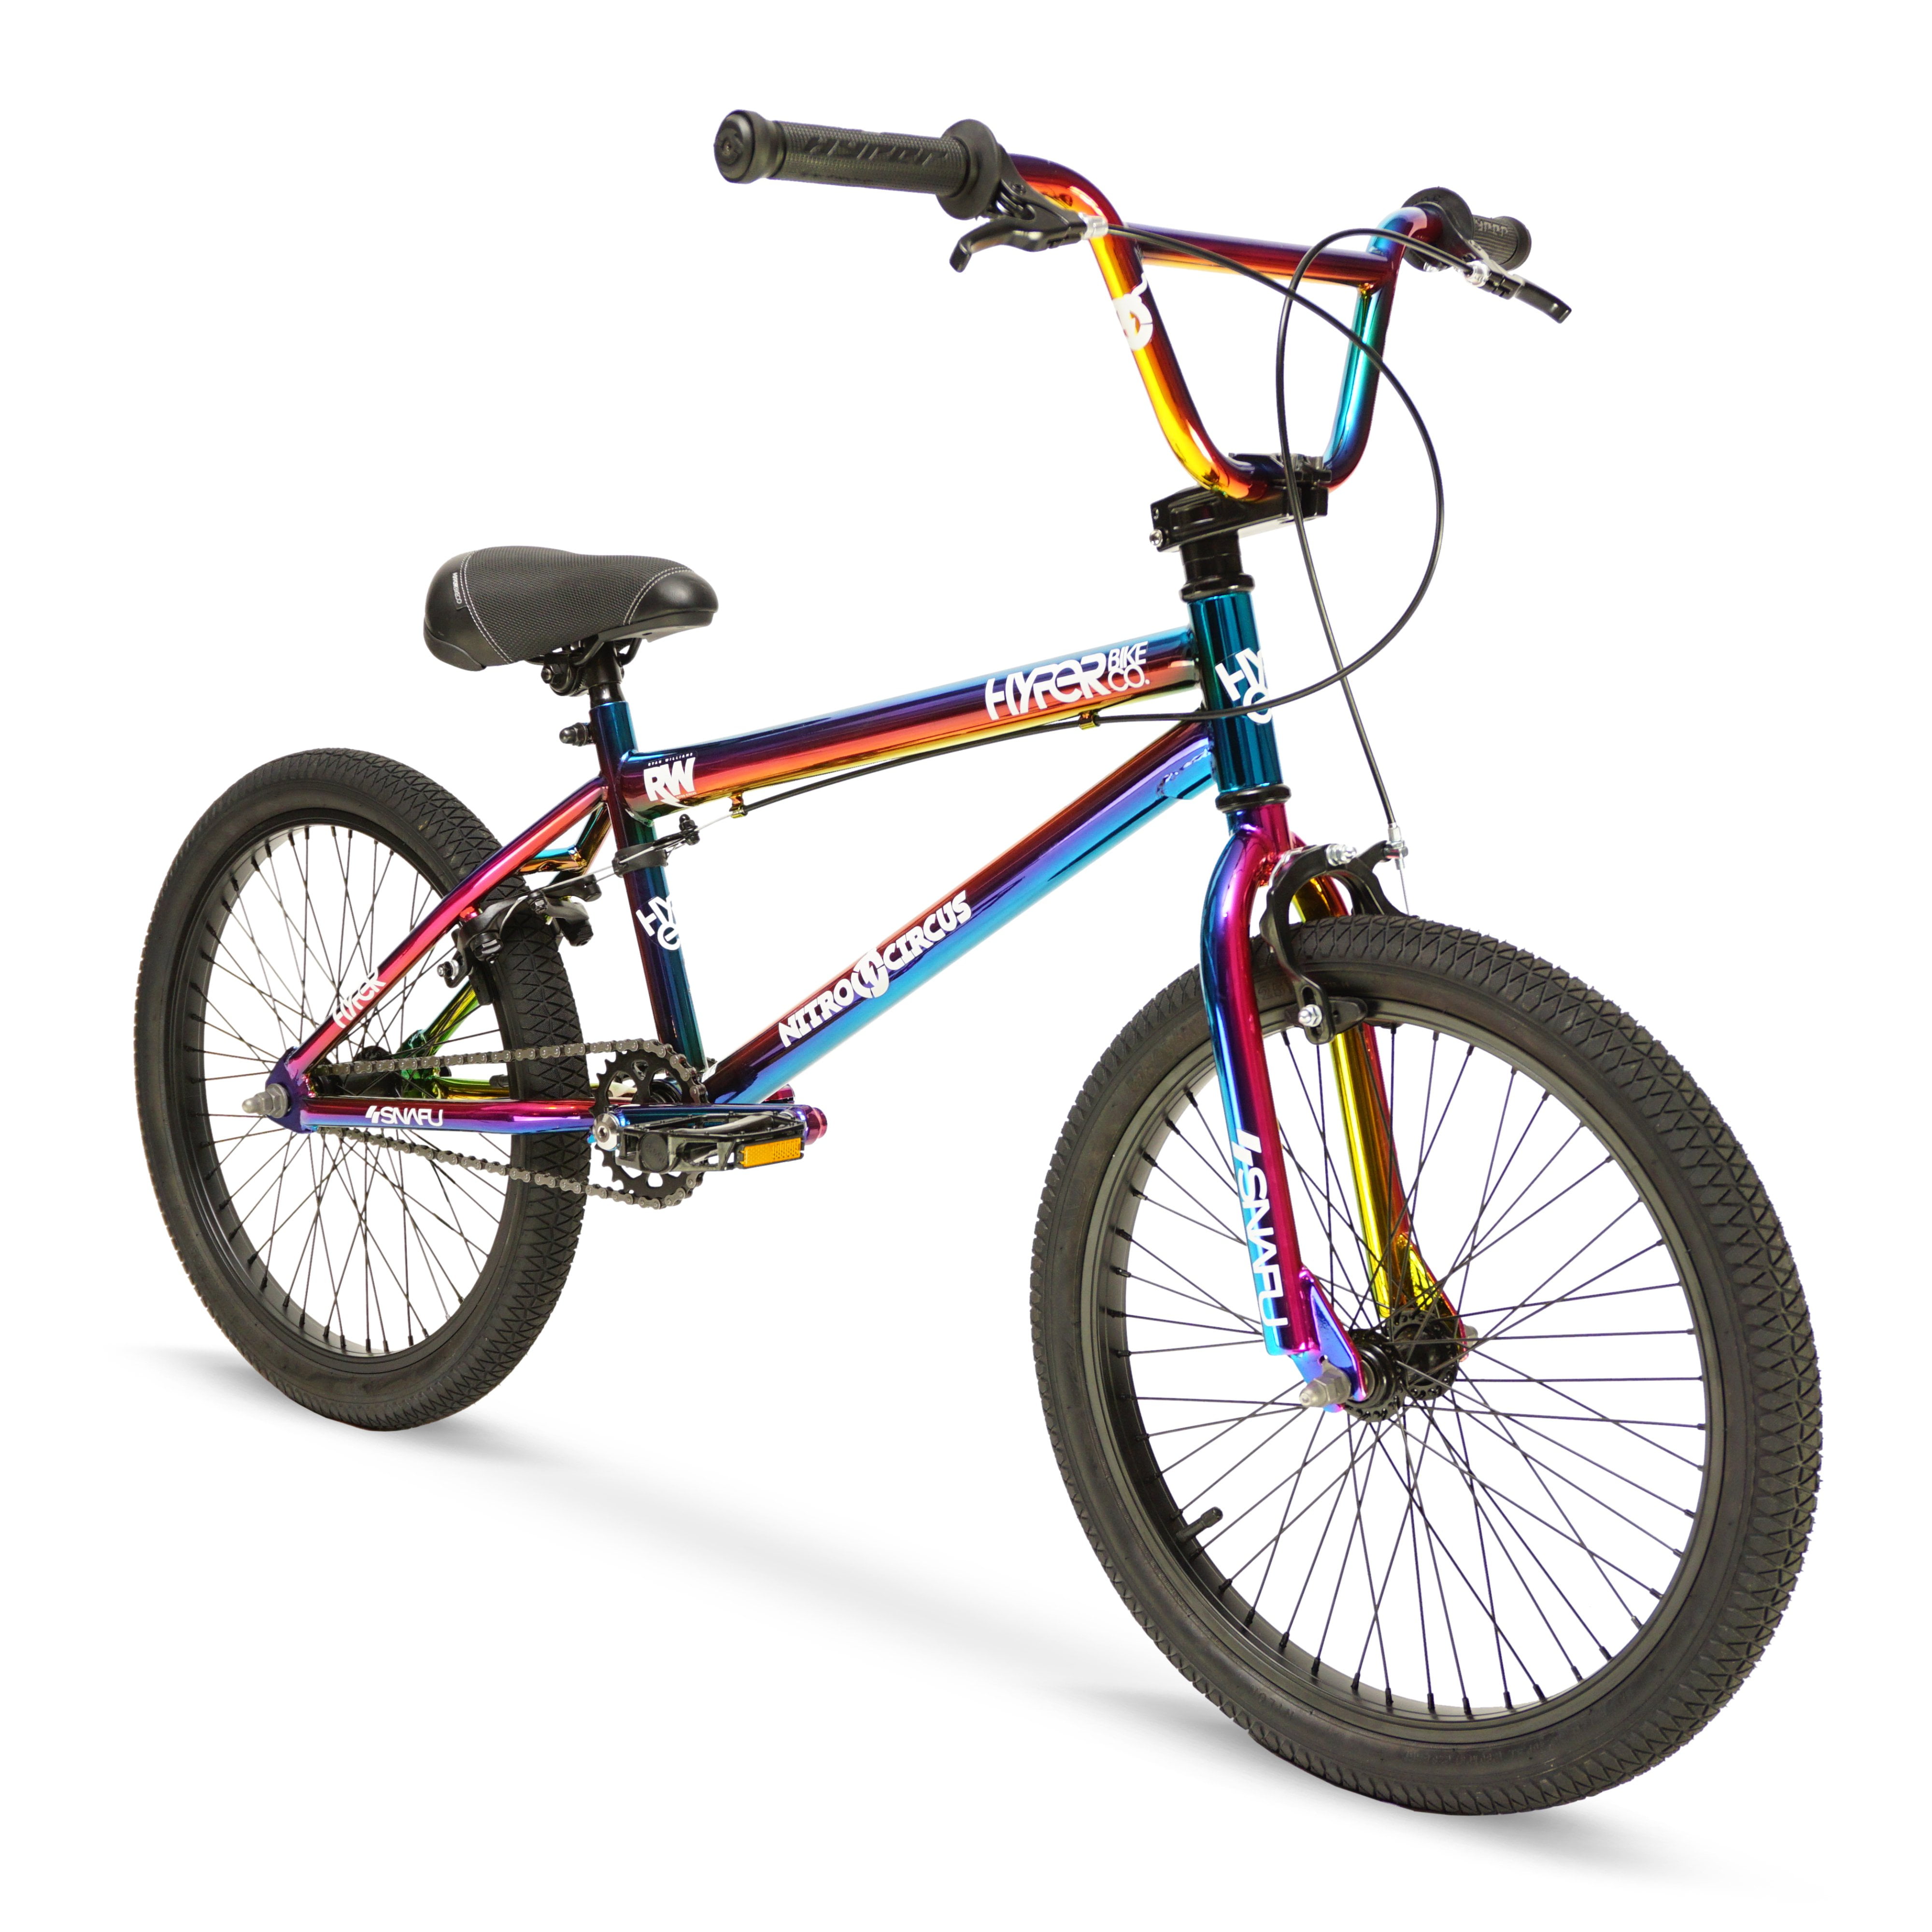 20" Rebel BMX Bike Sturdy Frame w/ Front Pegs Ages 8-12 Rider Height 4'2"+ 